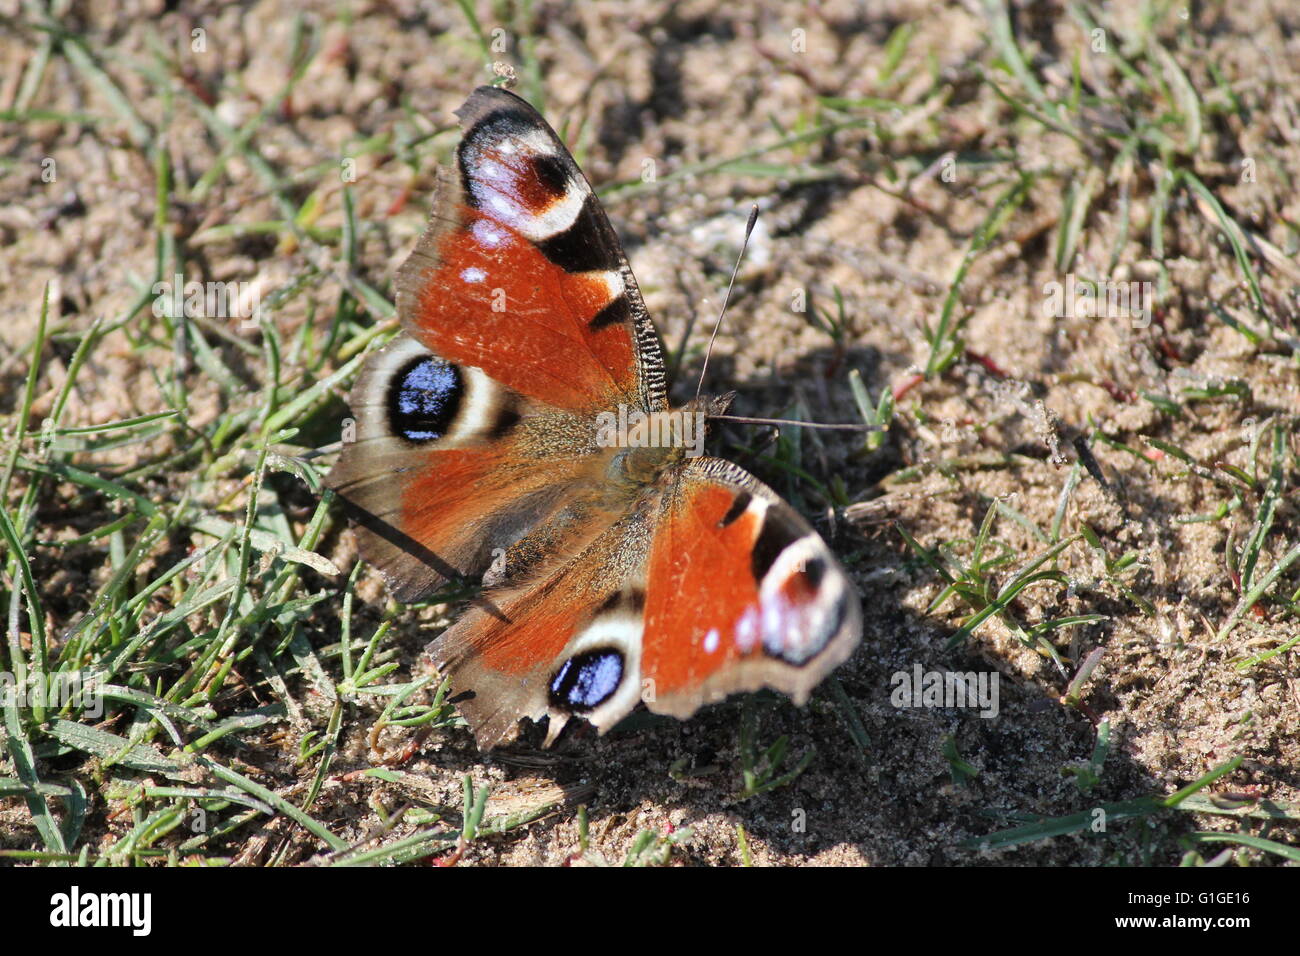 orange with fake eyes on wings butterfly sit on grass under spring sun Stock Photo